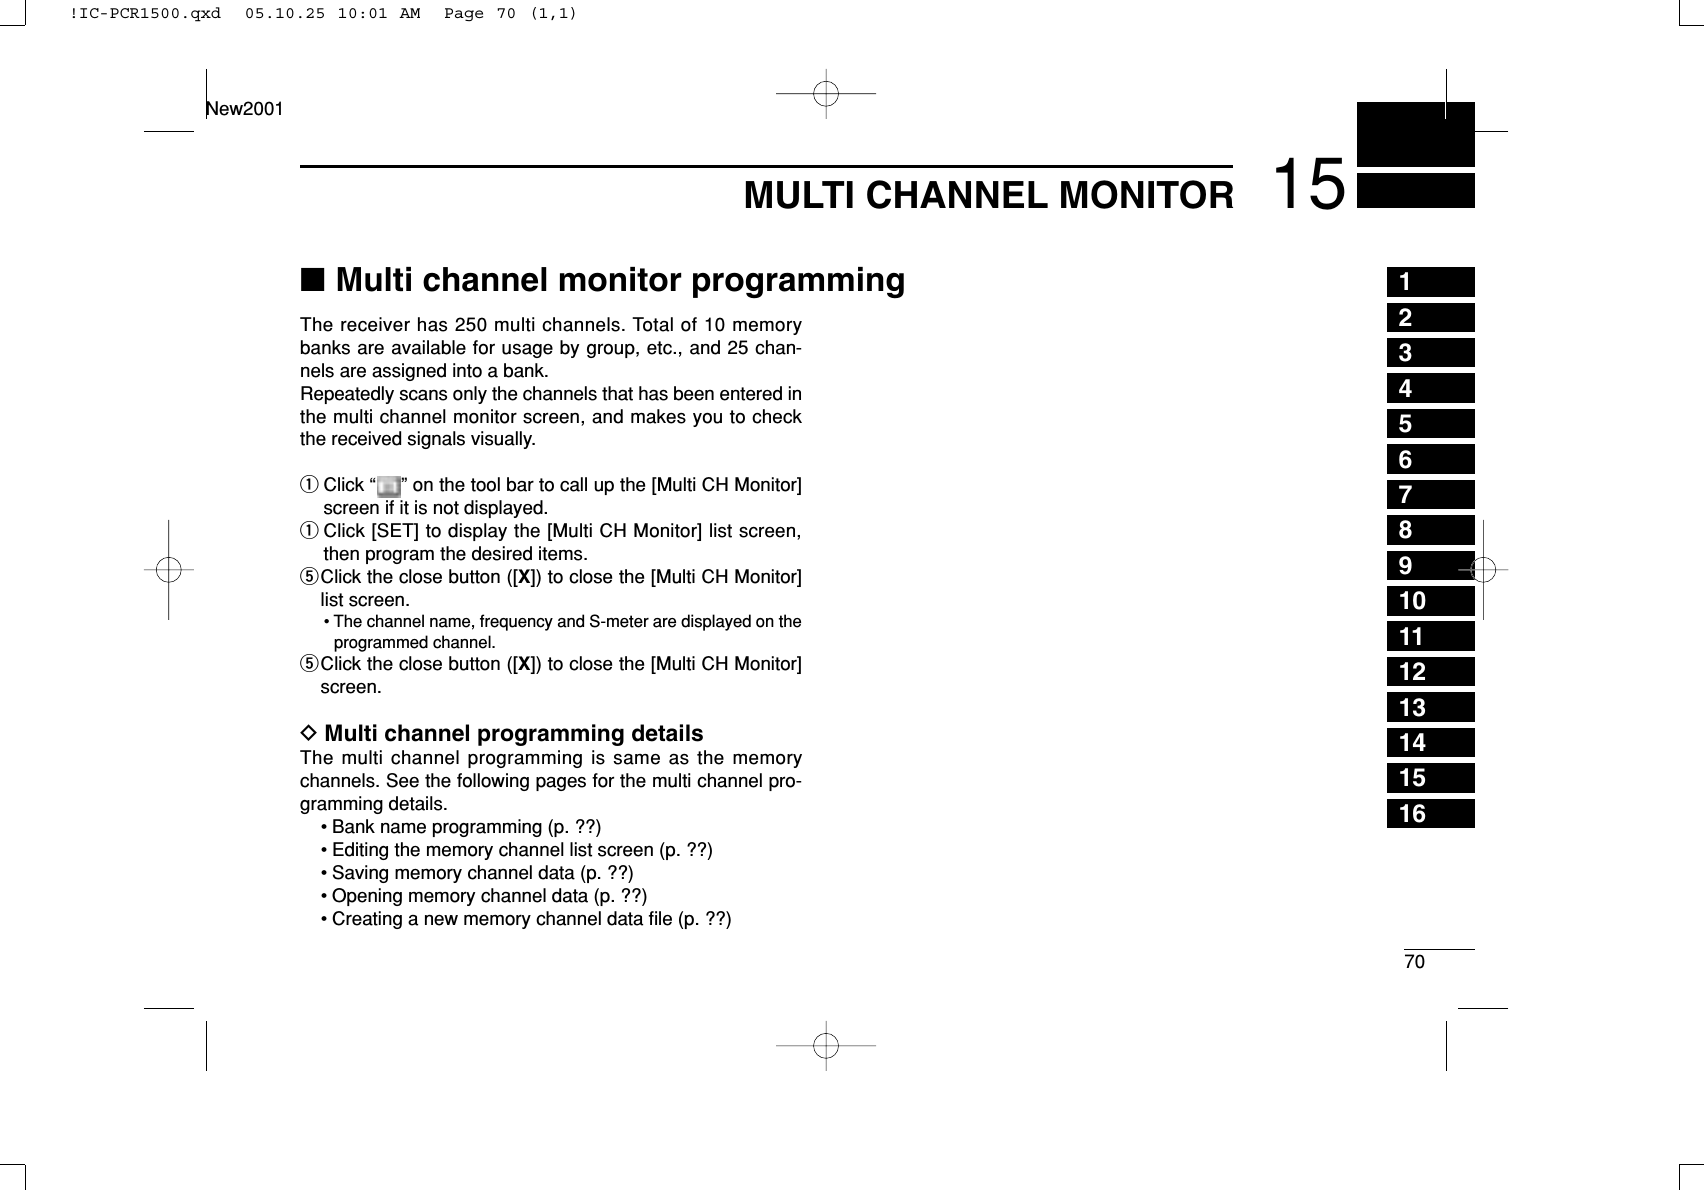 7015MULTI CHANNEL MONITOR12345678910111213141516New2001The receiver has 250 multi channels. Total of 10 memorybanks are available for usage by group, etc., and 25 chan-nels are assigned into a bank.Repeatedly scans only the channels that has been entered inthe multi channel monitor screen, and makes you to checkthe received signals visually.qClick “ ” on the tool bar to call up the [Multi CH Monitor]screen if it is not displayed.qClick [SET] to display the [Multi CH Monitor] list screen,then program the desired items.tClick the close button ([X]) to close the [Multi CH Monitor]list screen.• The channel name, frequency and S-meter are displayed on theprogrammed channel.tClick the close button ([X]) to close the [Multi CH Monitor]screen.DMulti channel programming detailsThe multi channel programming is same as the memorychannels. See the following pages for the multi channel pro-gramming details.• Bank name programming (p. ??)• Editing the memory channel list screen (p. ??)• Saving memory channel data (p. ??)• Opening memory channel data (p. ??)• Creating a new memory channel data ﬁle (p. ??)■Multi channel monitor programming!IC-PCR1500.qxd  05.10.25 10:01 AM  Page 70 (1,1)